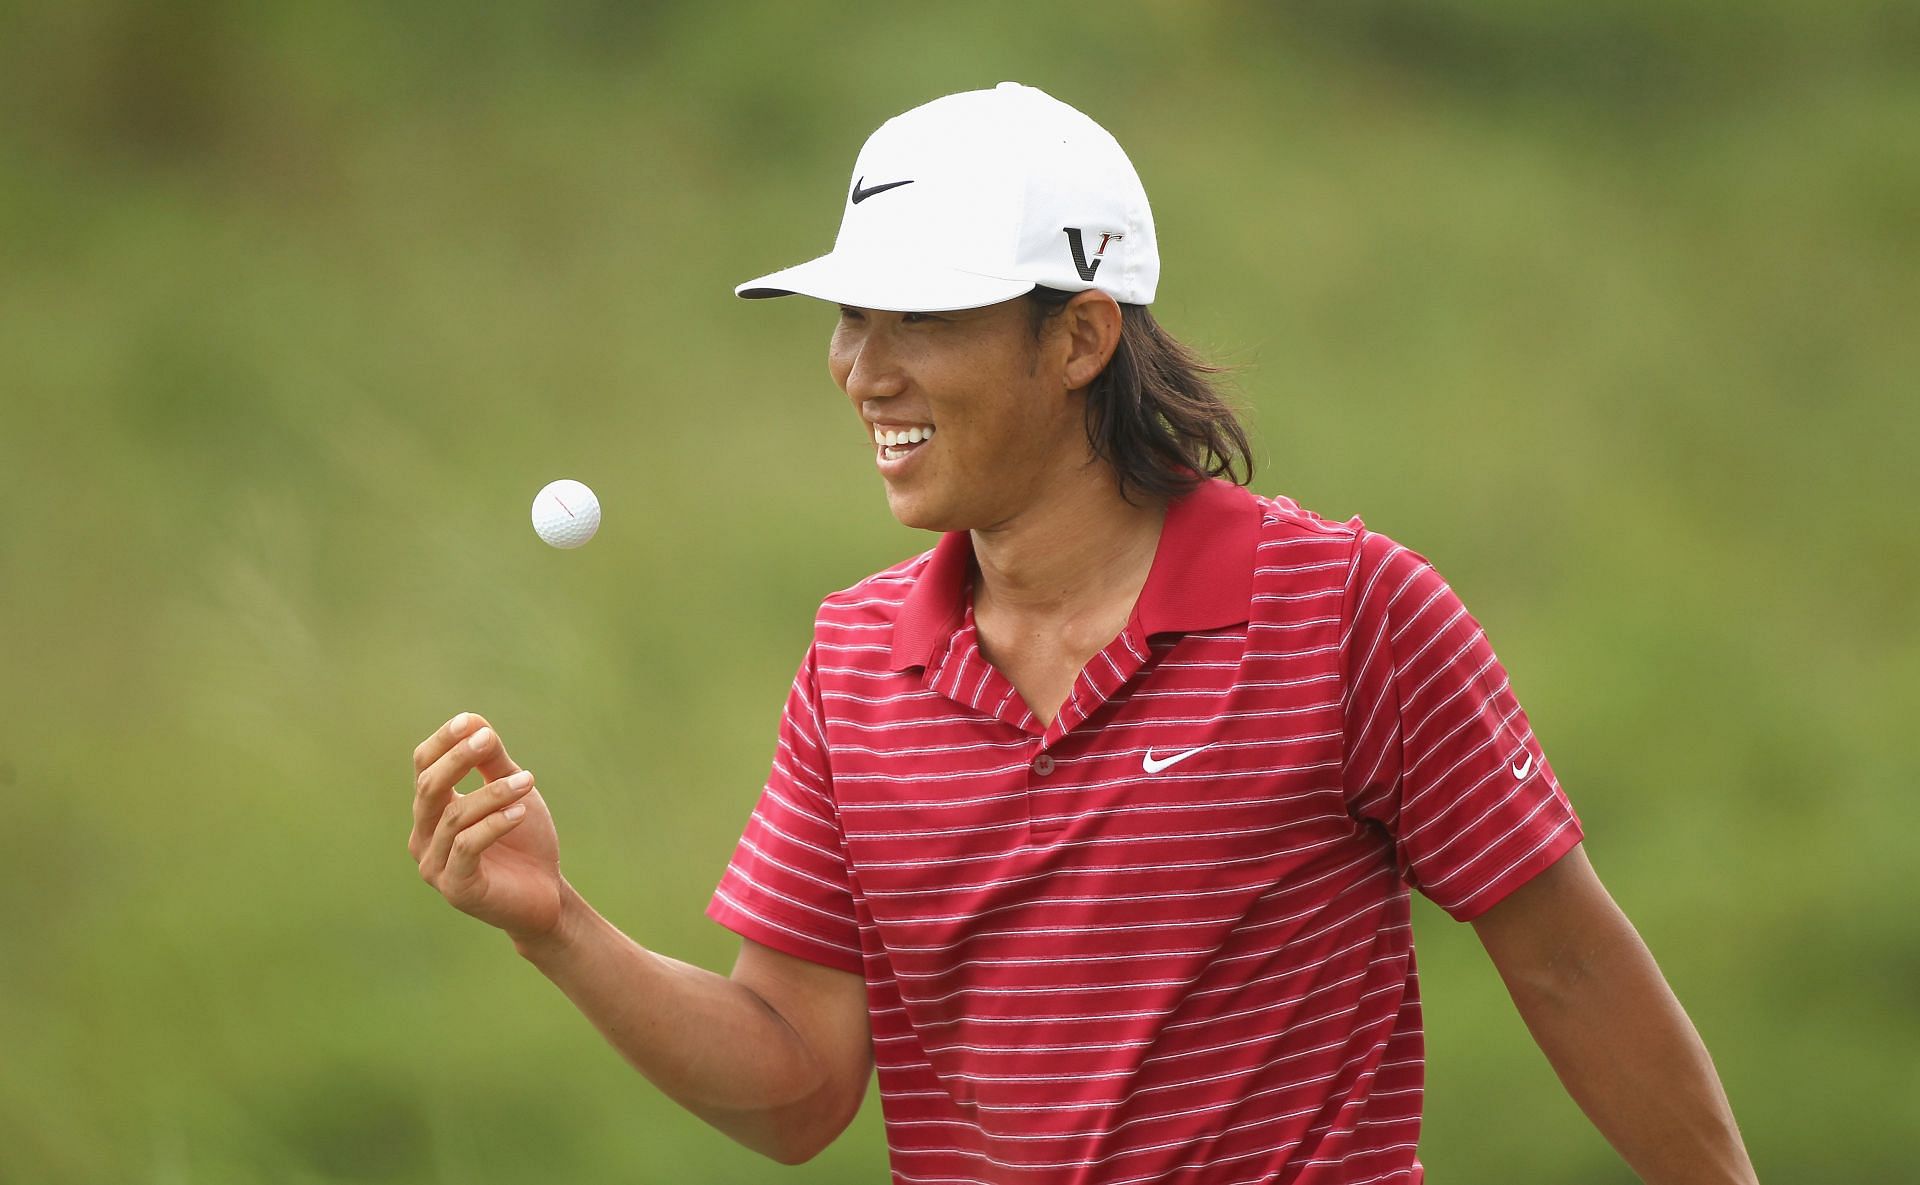 Anthony Kim is back after his exodus